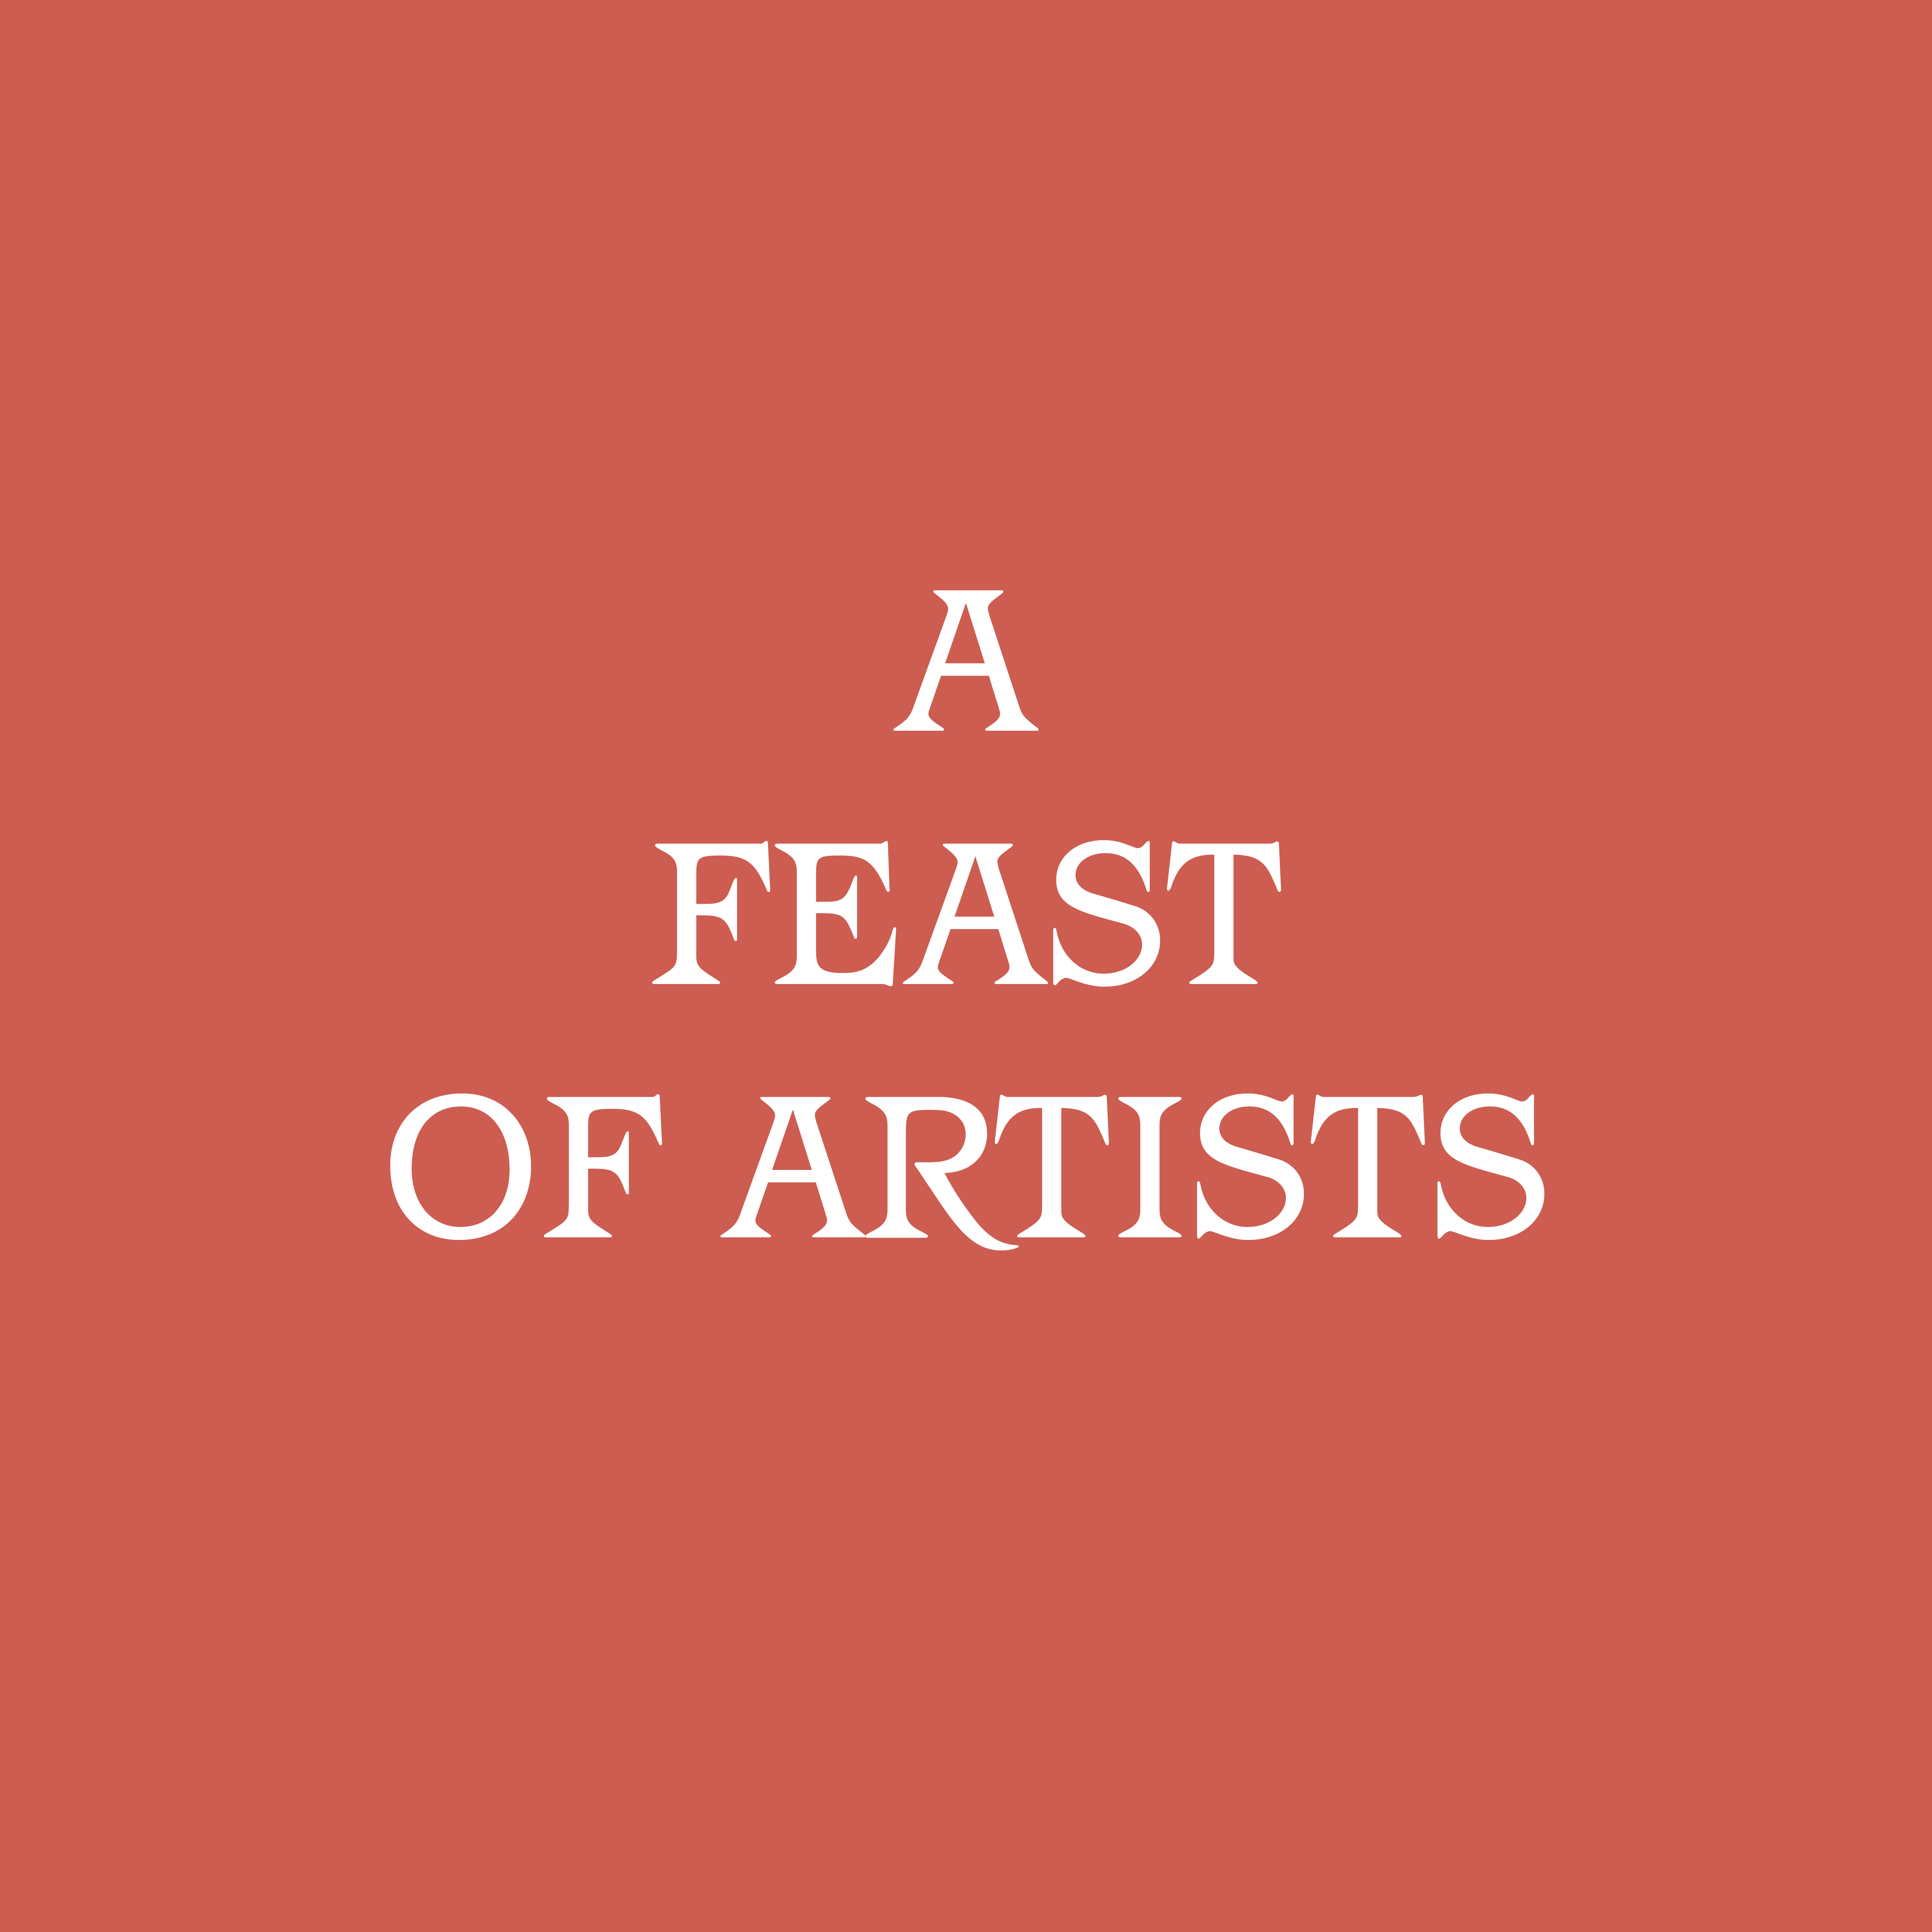 5.-A-FEAST-OF-ARTISTS